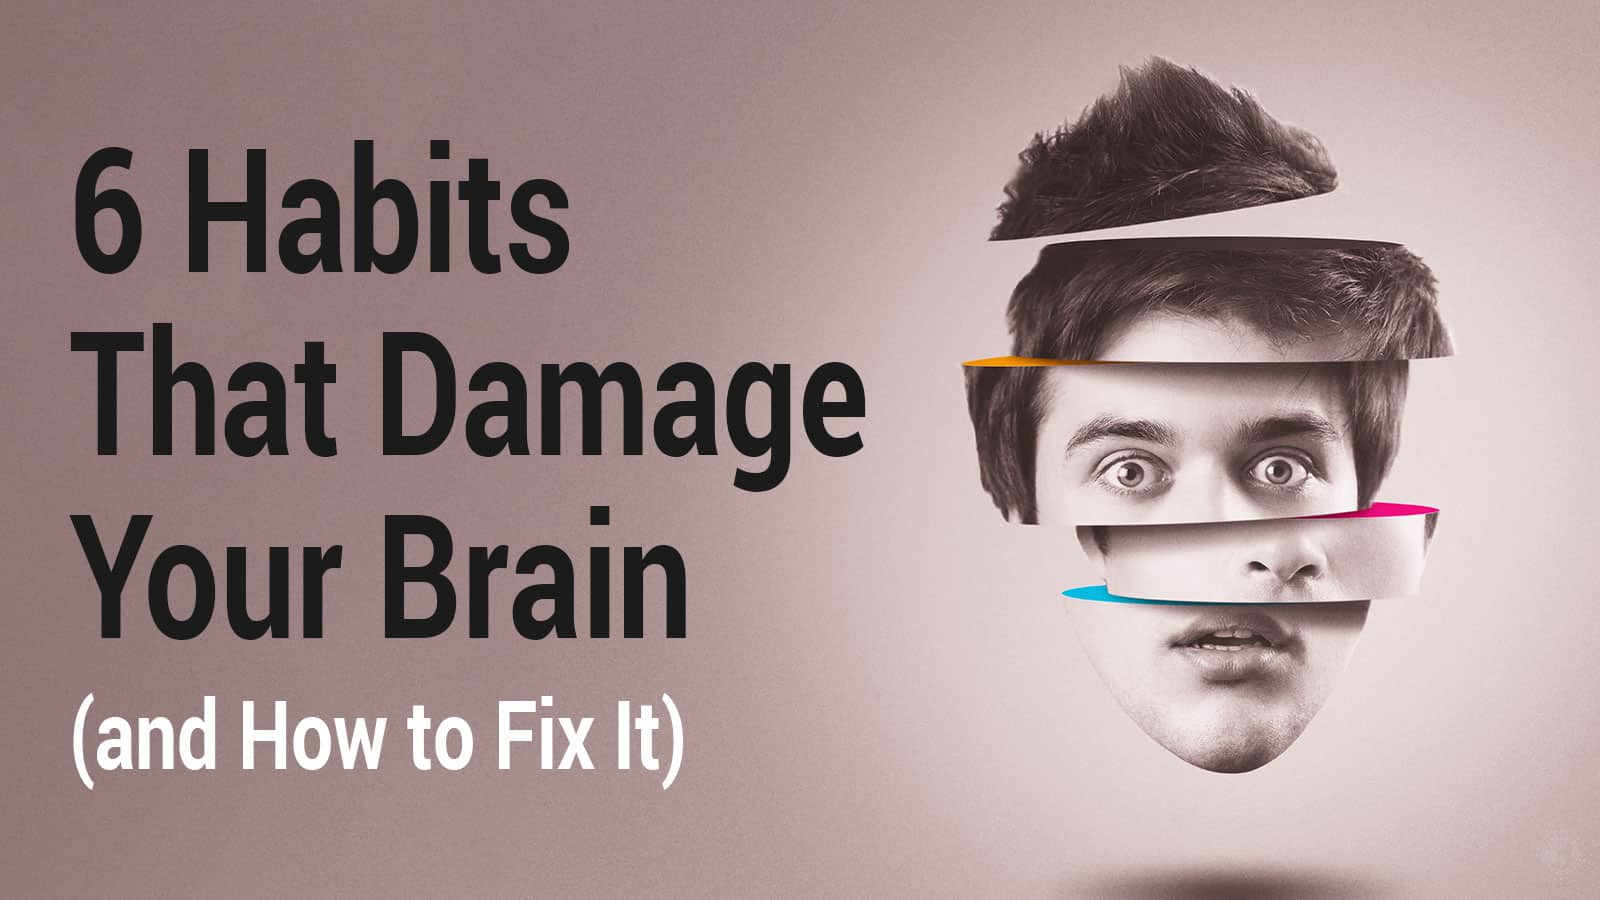 6-Habits-That-Damage-Your-Brain-and-How-to-Fix-It.jpg